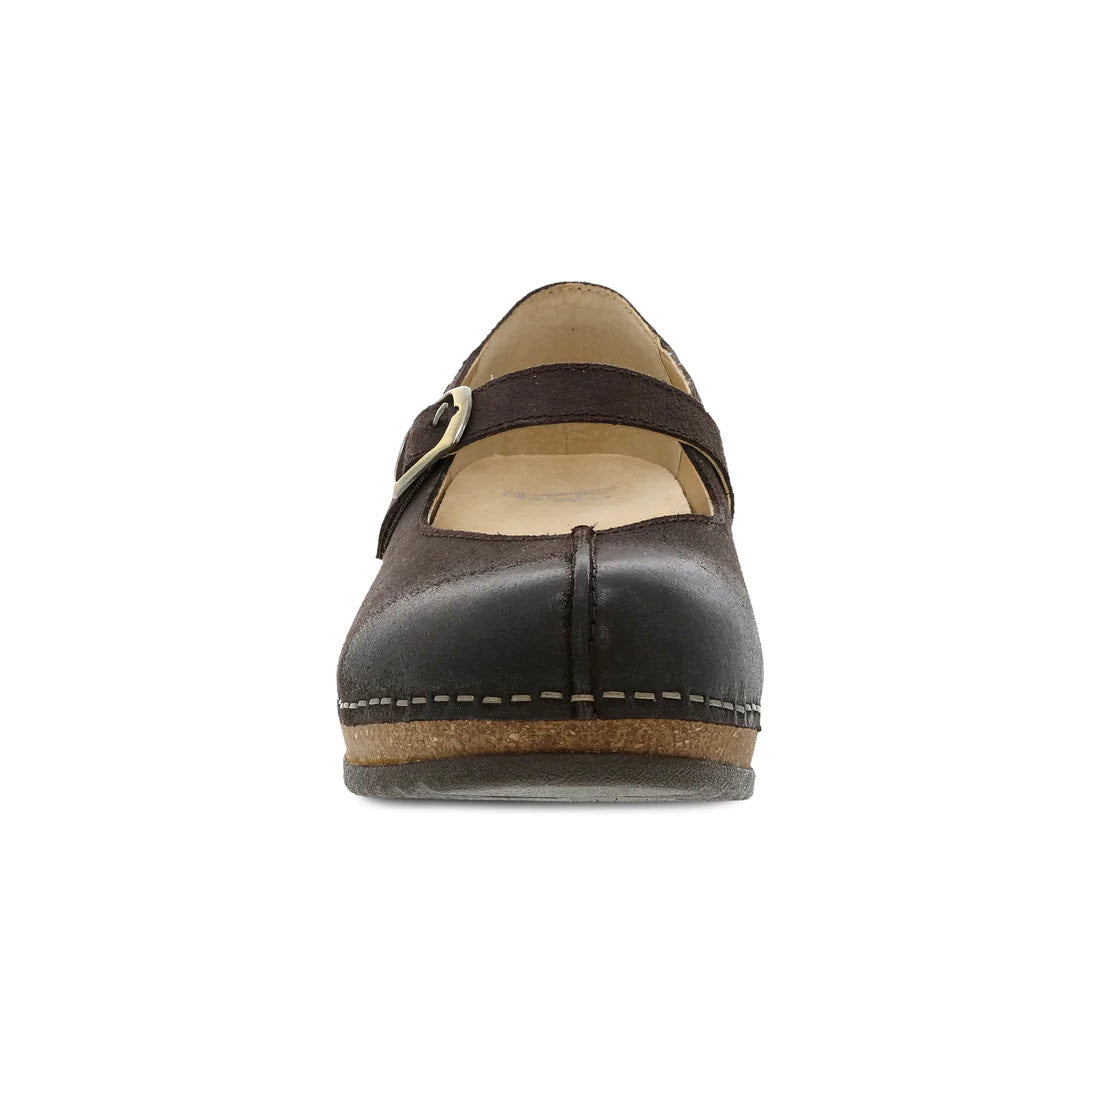 Front view of a single dark gray Dansko Mika chocolate burnished suede Mary Jane shoe crafted from high-quality leathers, with a strap and contrast stitching, isolated on a white background.